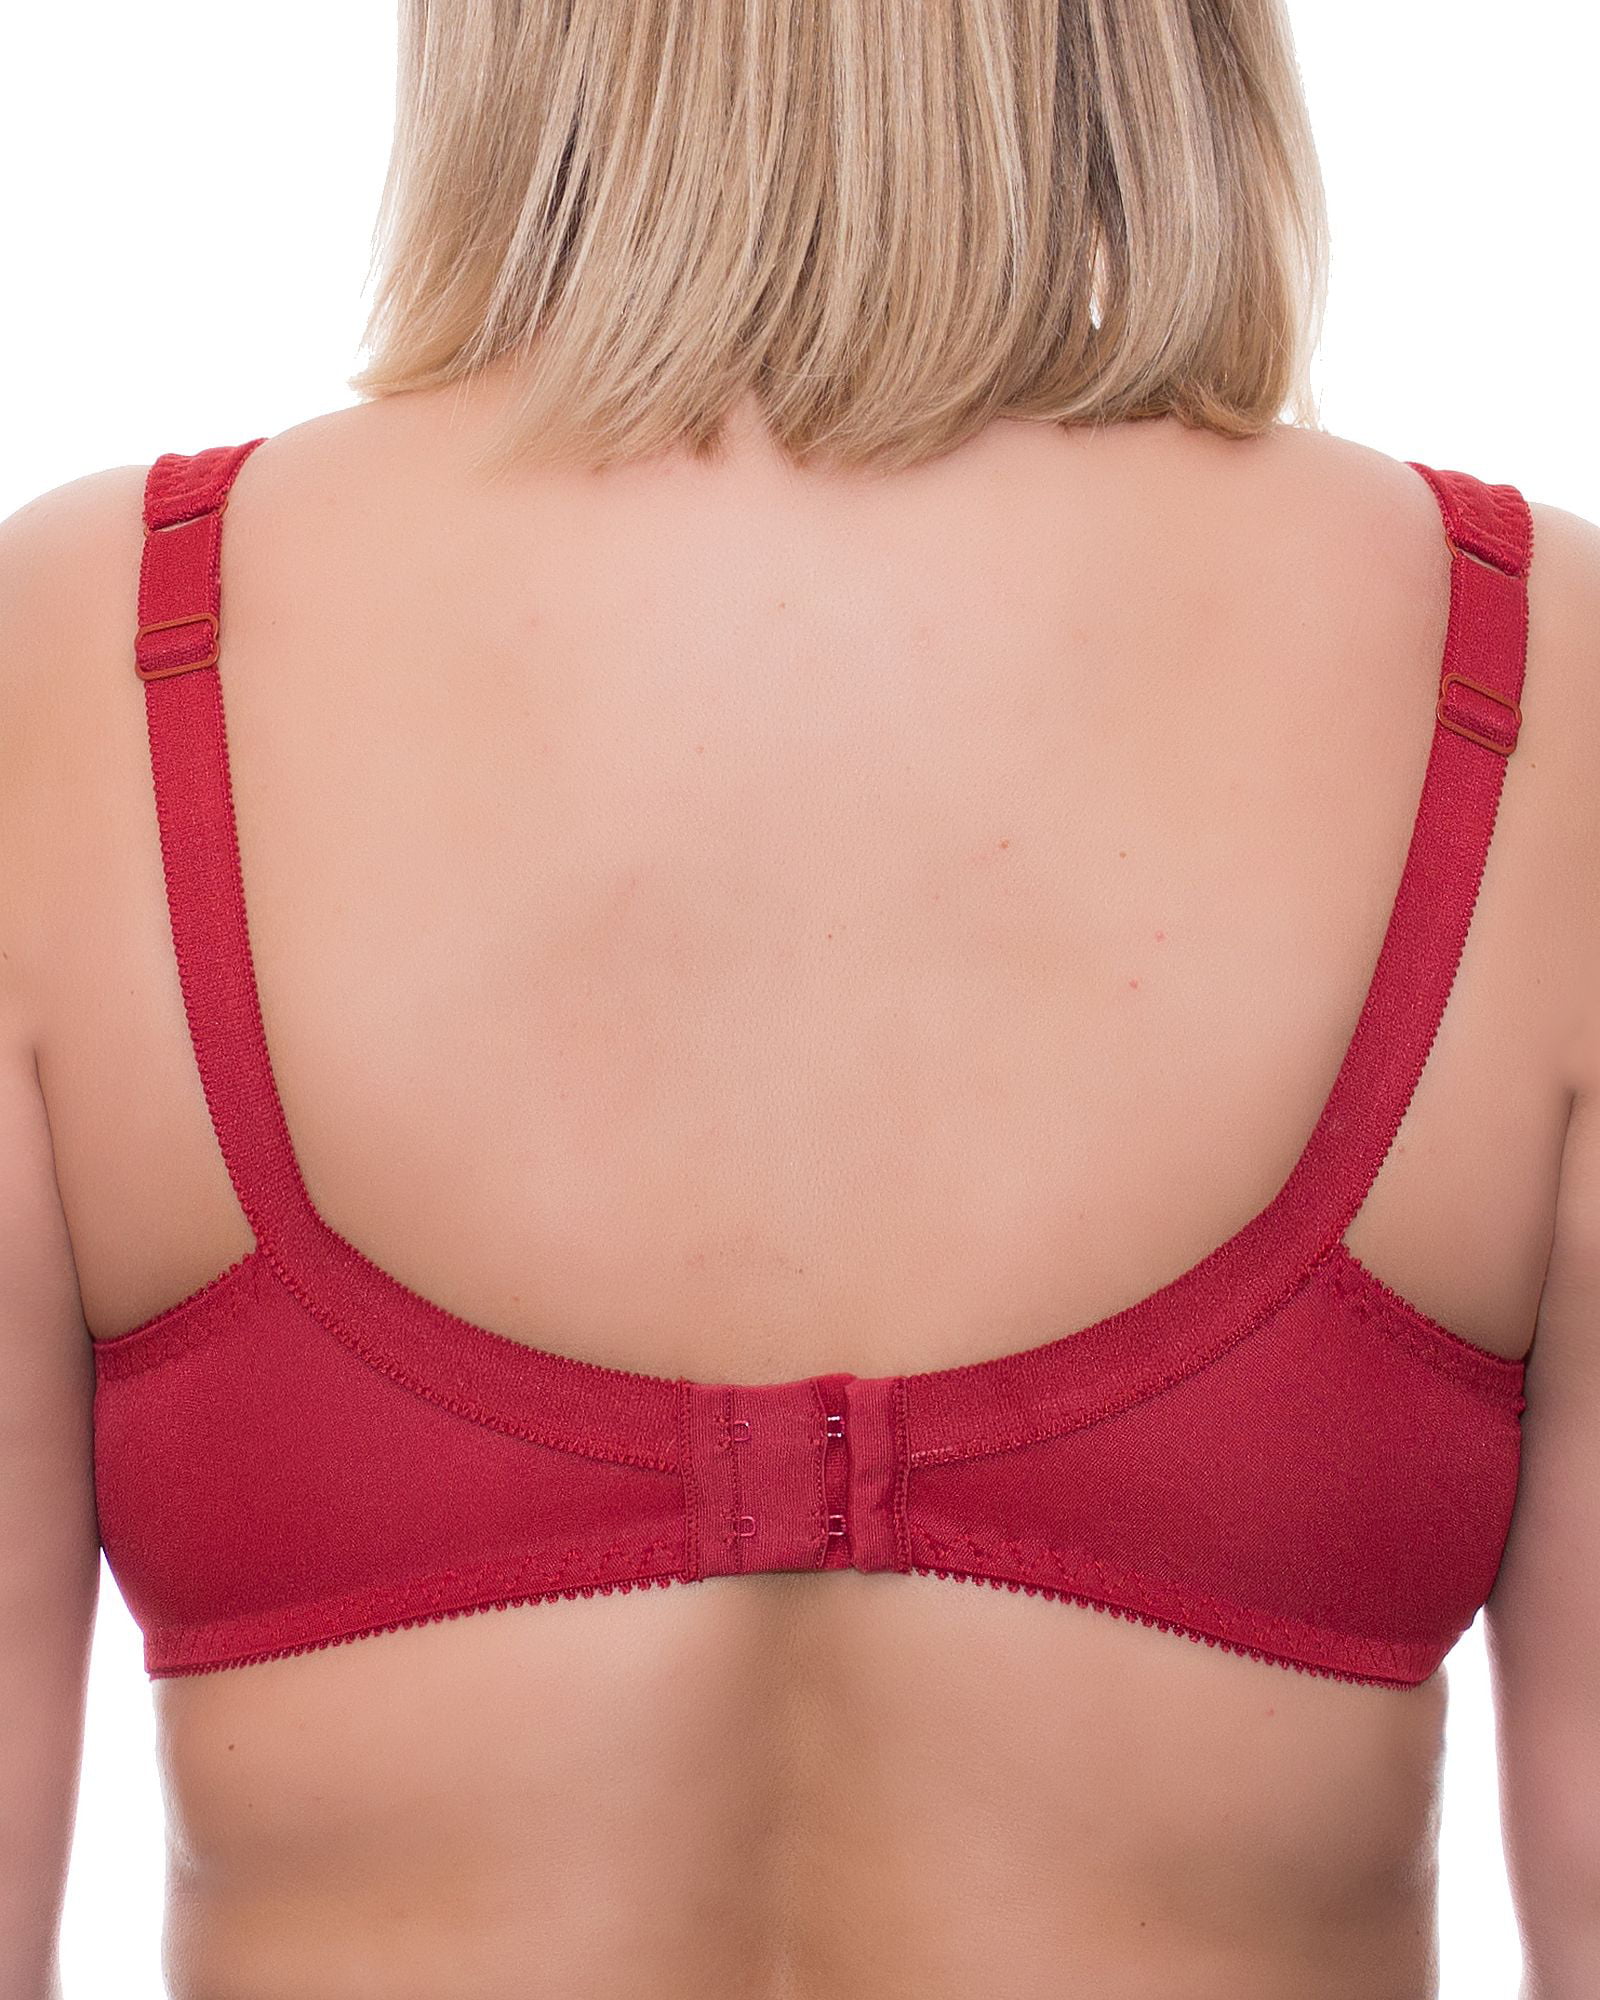 Wide Strap Bra Plus Size Full Coverage Underwire Support Panels 34 36 38 40  42 44 46 / C D E F G H I J ( 38J, Red) 